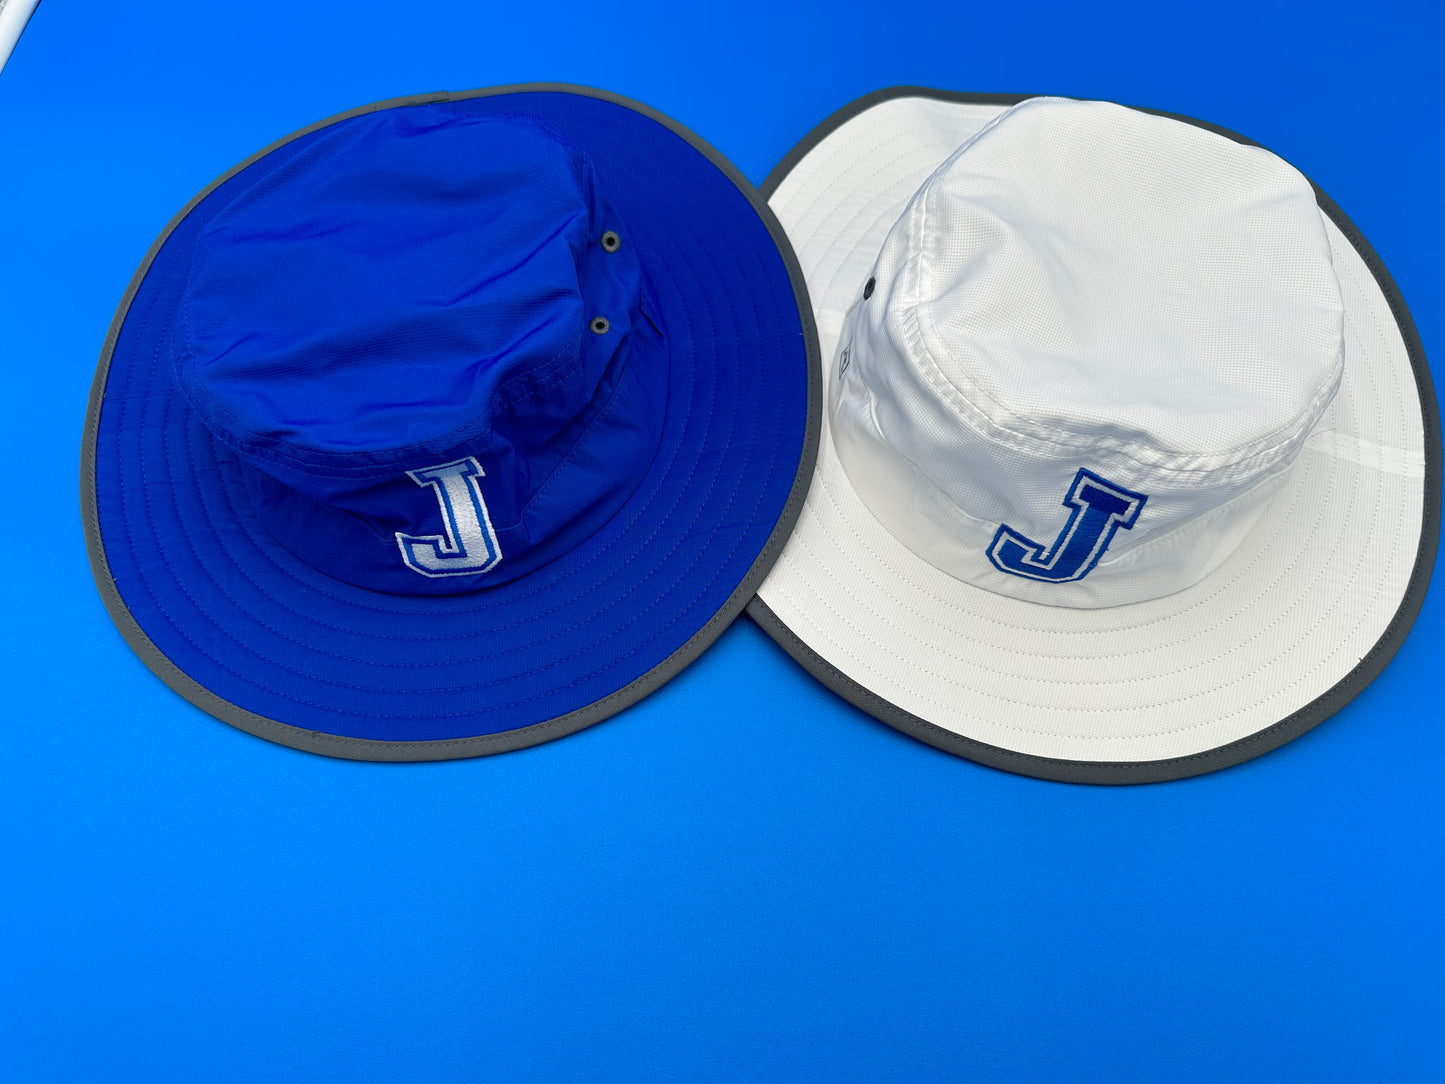 Richardson.  100% Polyester.  Lightweight Performance Fabric.  One Size Fits Most (w/adjustable elastic band).  Available with J or Jayson logo in Royal Blue or White!